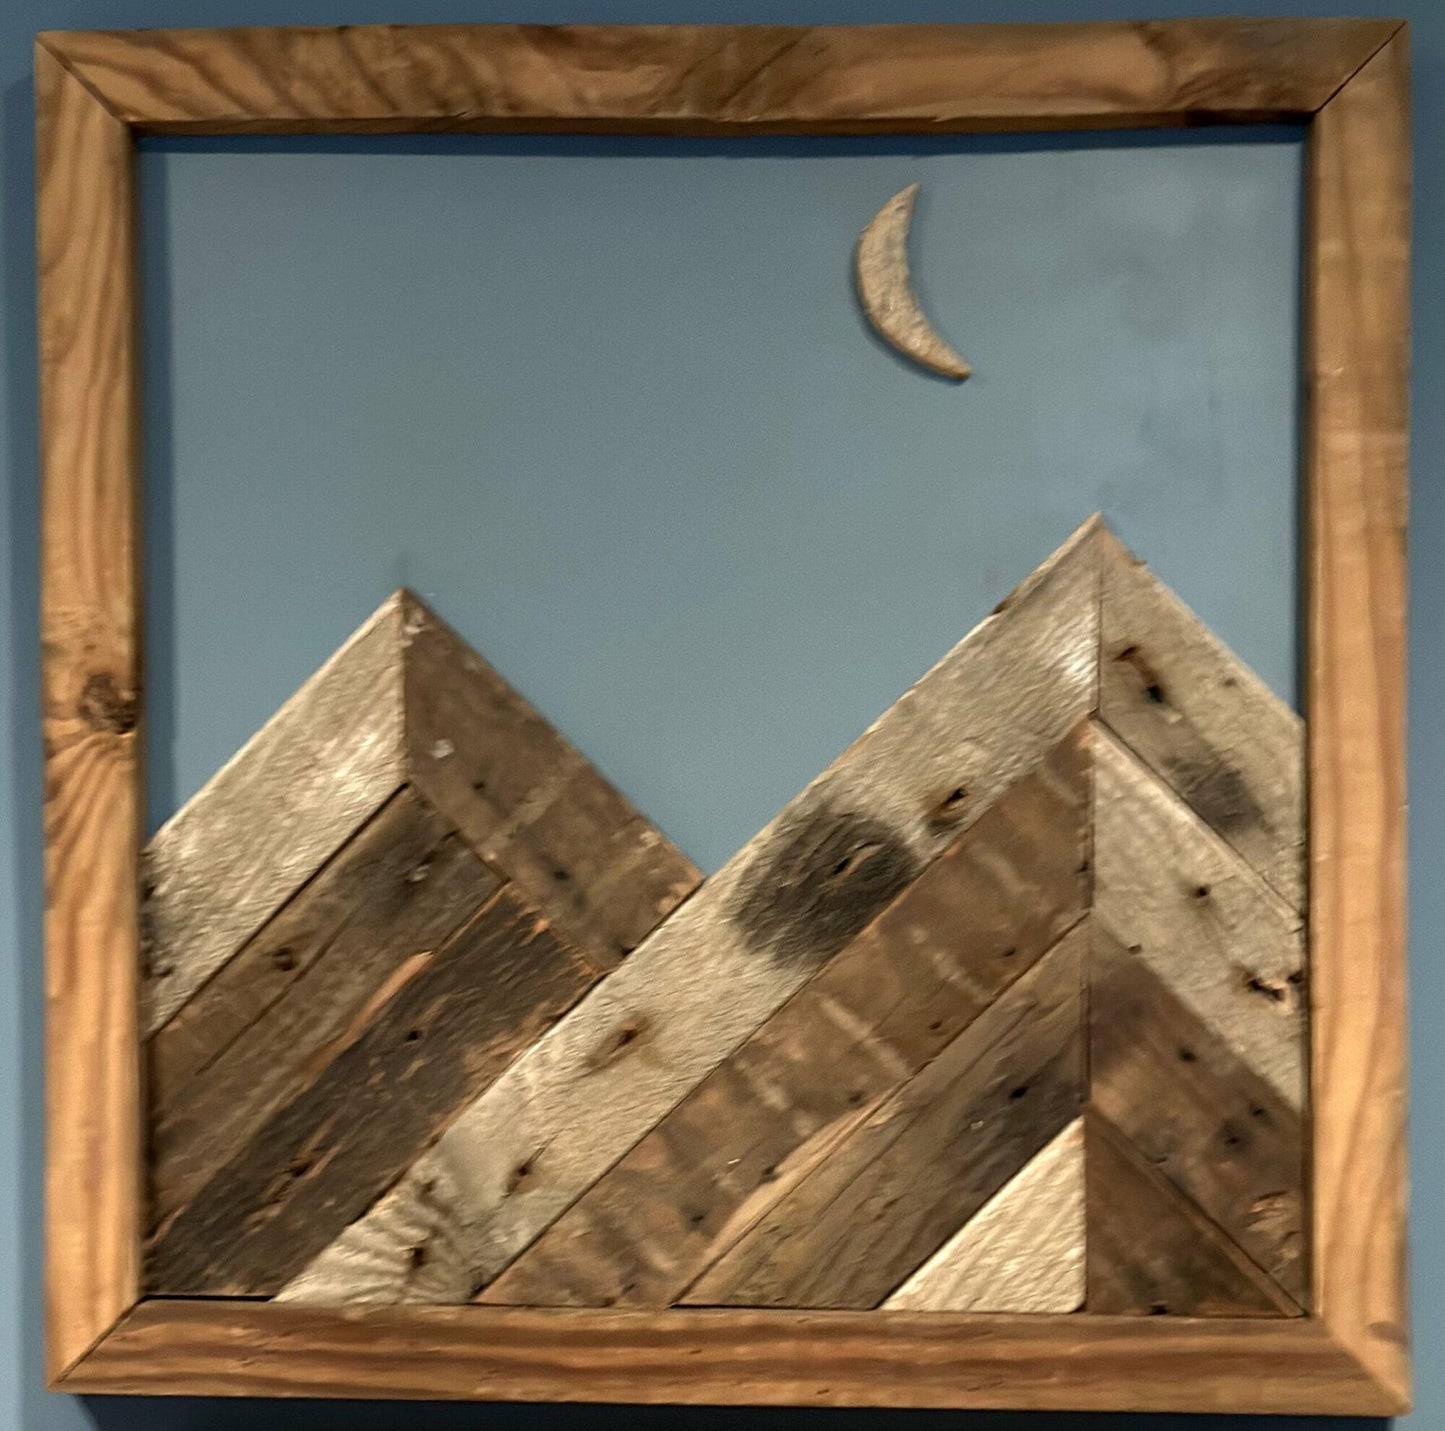 wall decor that looks like two mountains with a crescent moon overtop. Mountains, moon, and frame of wall decor all made from reclaimed barnwood. Wood shows grain patterns and other distressed characteristics.